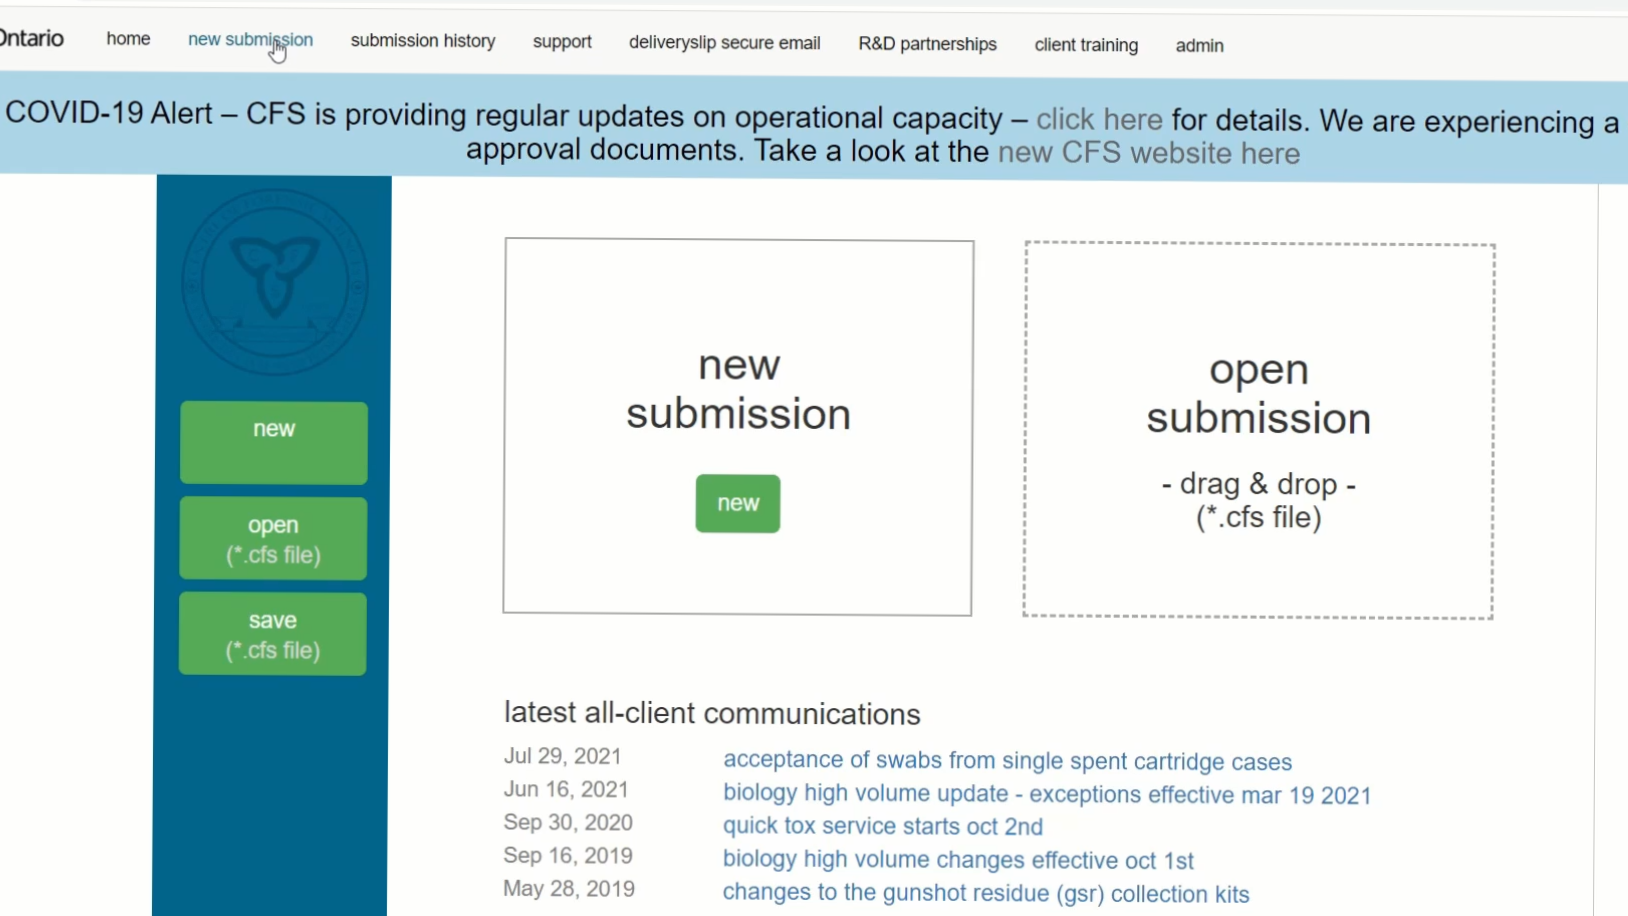 Create a High Volume Service submission request through the online submission portal